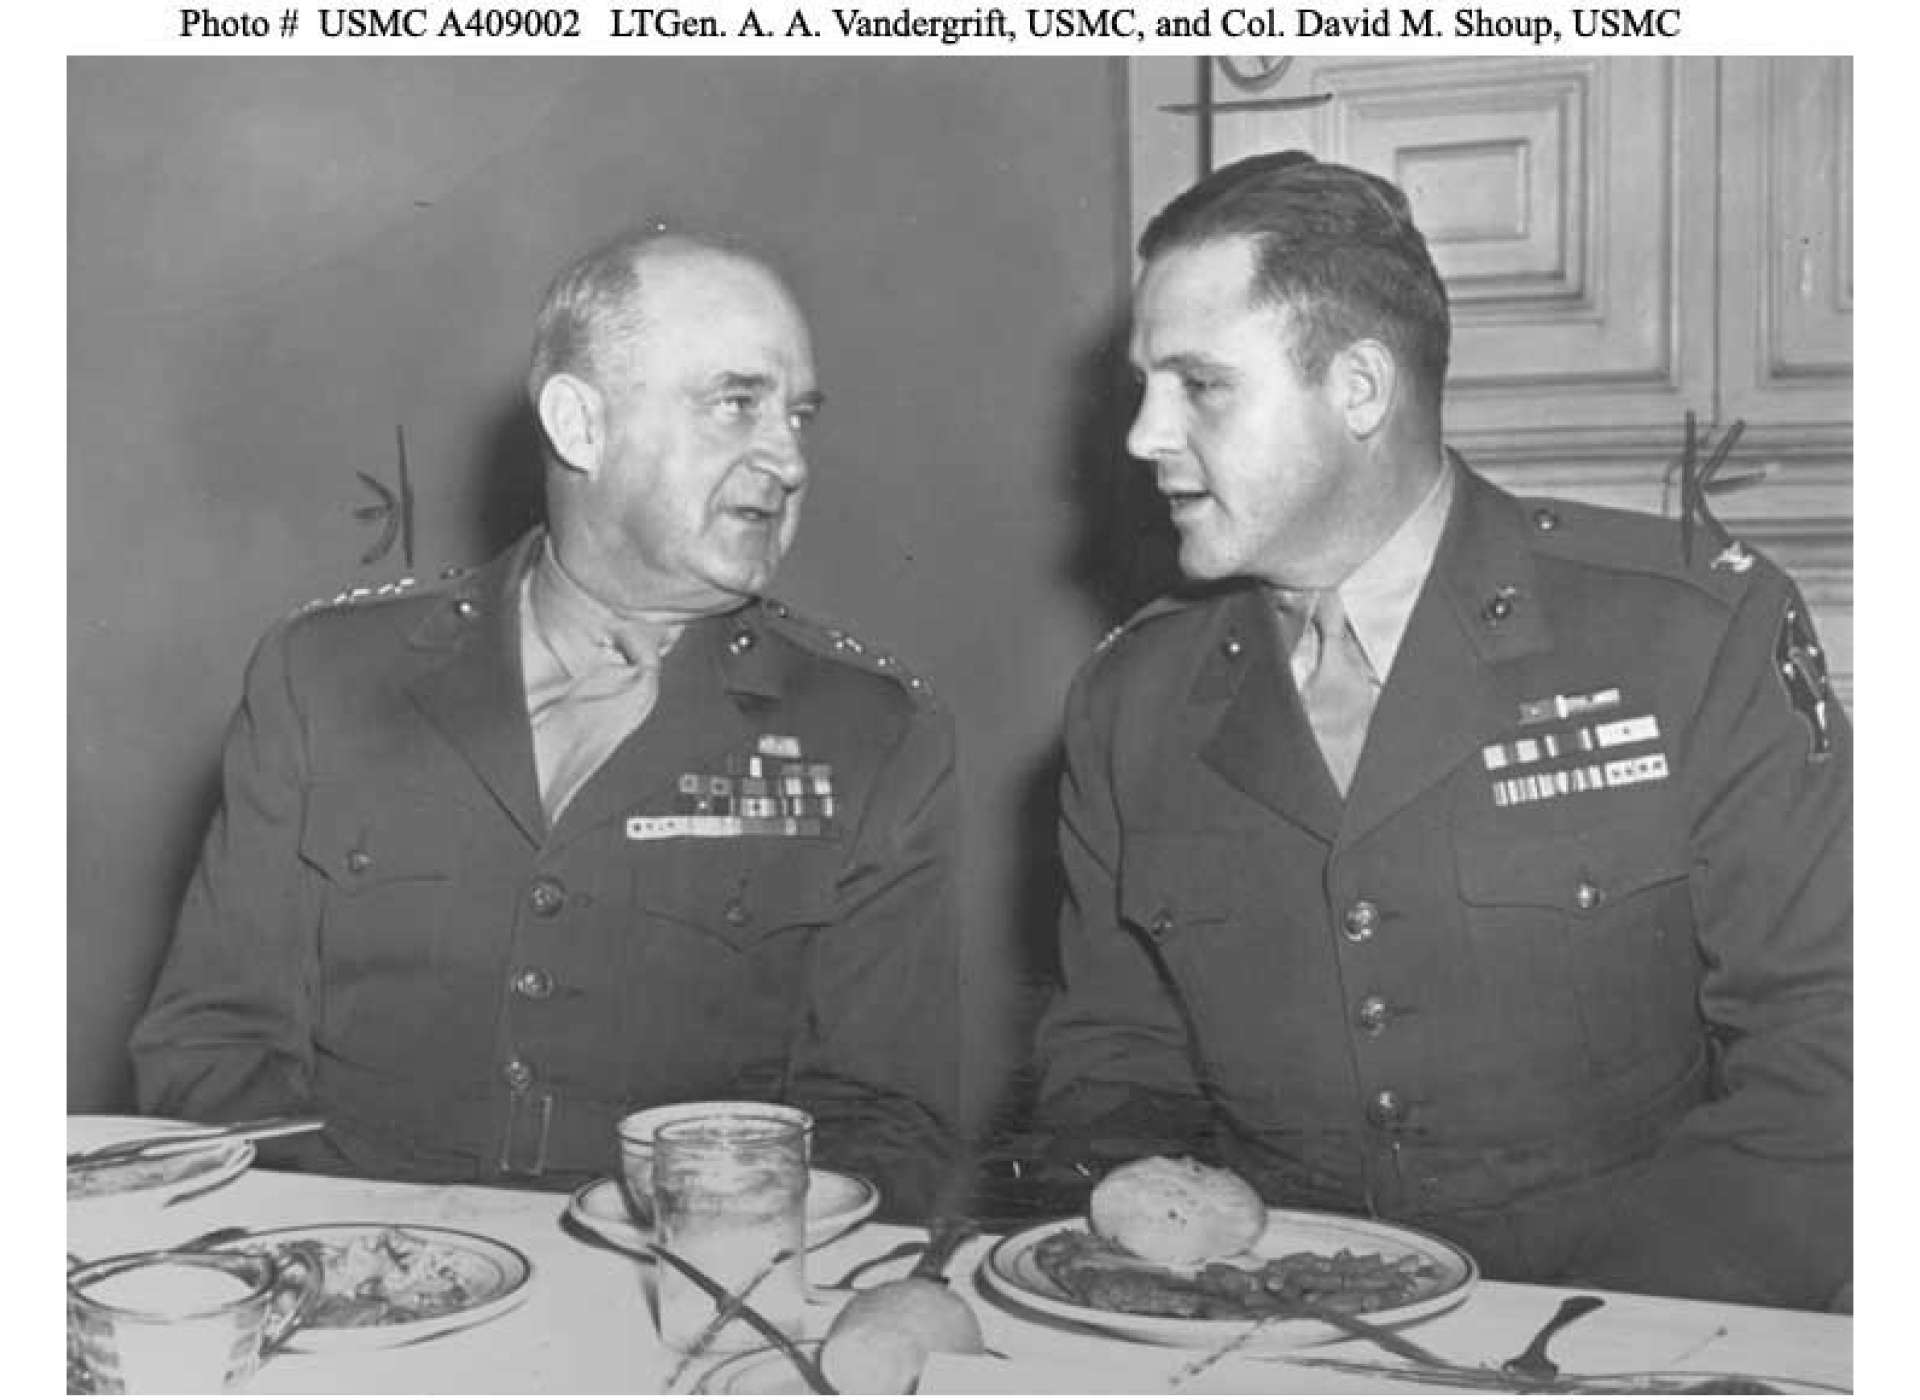 Lieutenant General Vandegrift with US Marine Corps Colonel (and fellow Medal of Honor recipient) David Shoup, 1943. Credit: Official U.S. Marine Corps photo, #A409002.